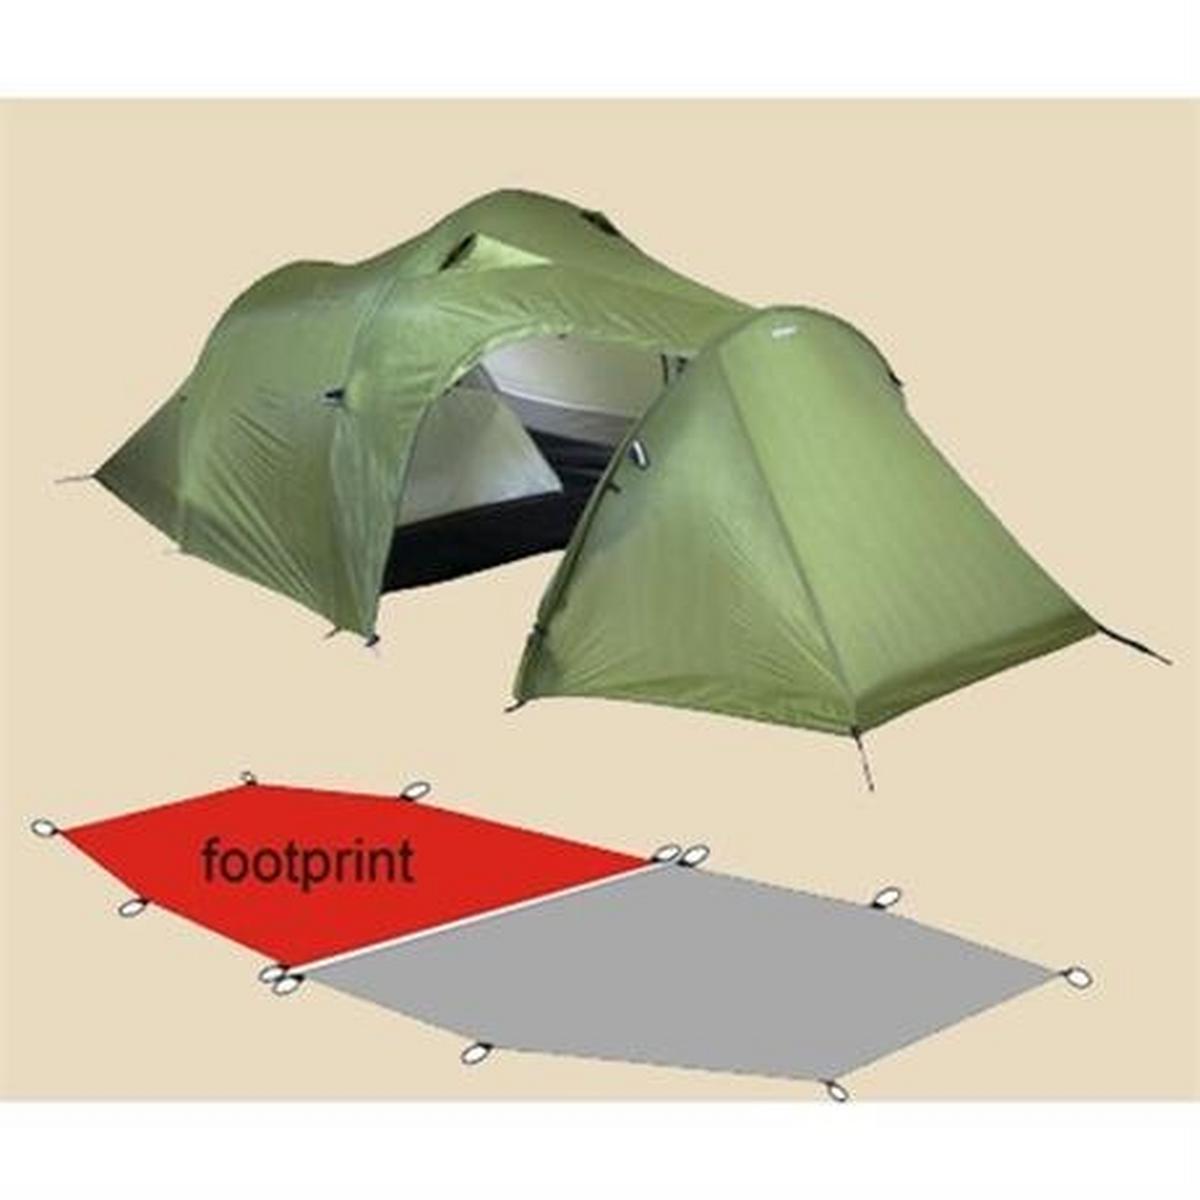 Lightwave Tent Spare/Accessory: Footprint for S20 Tent